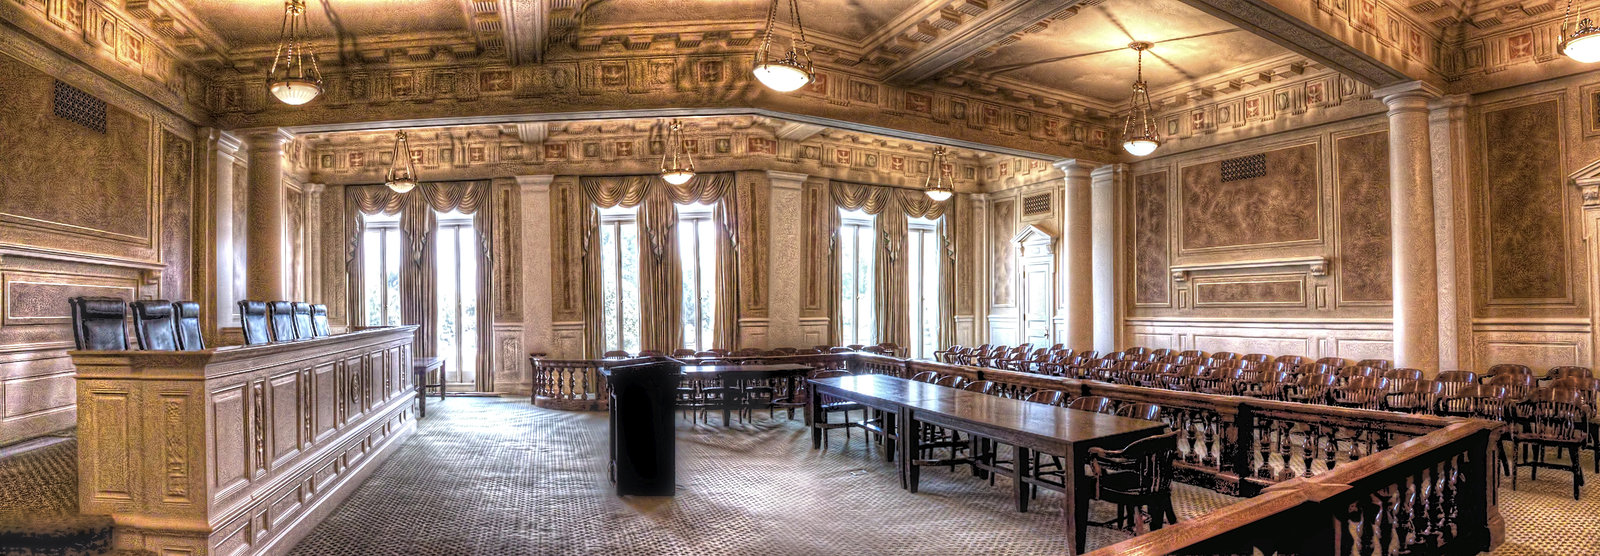 chicago-courtroom